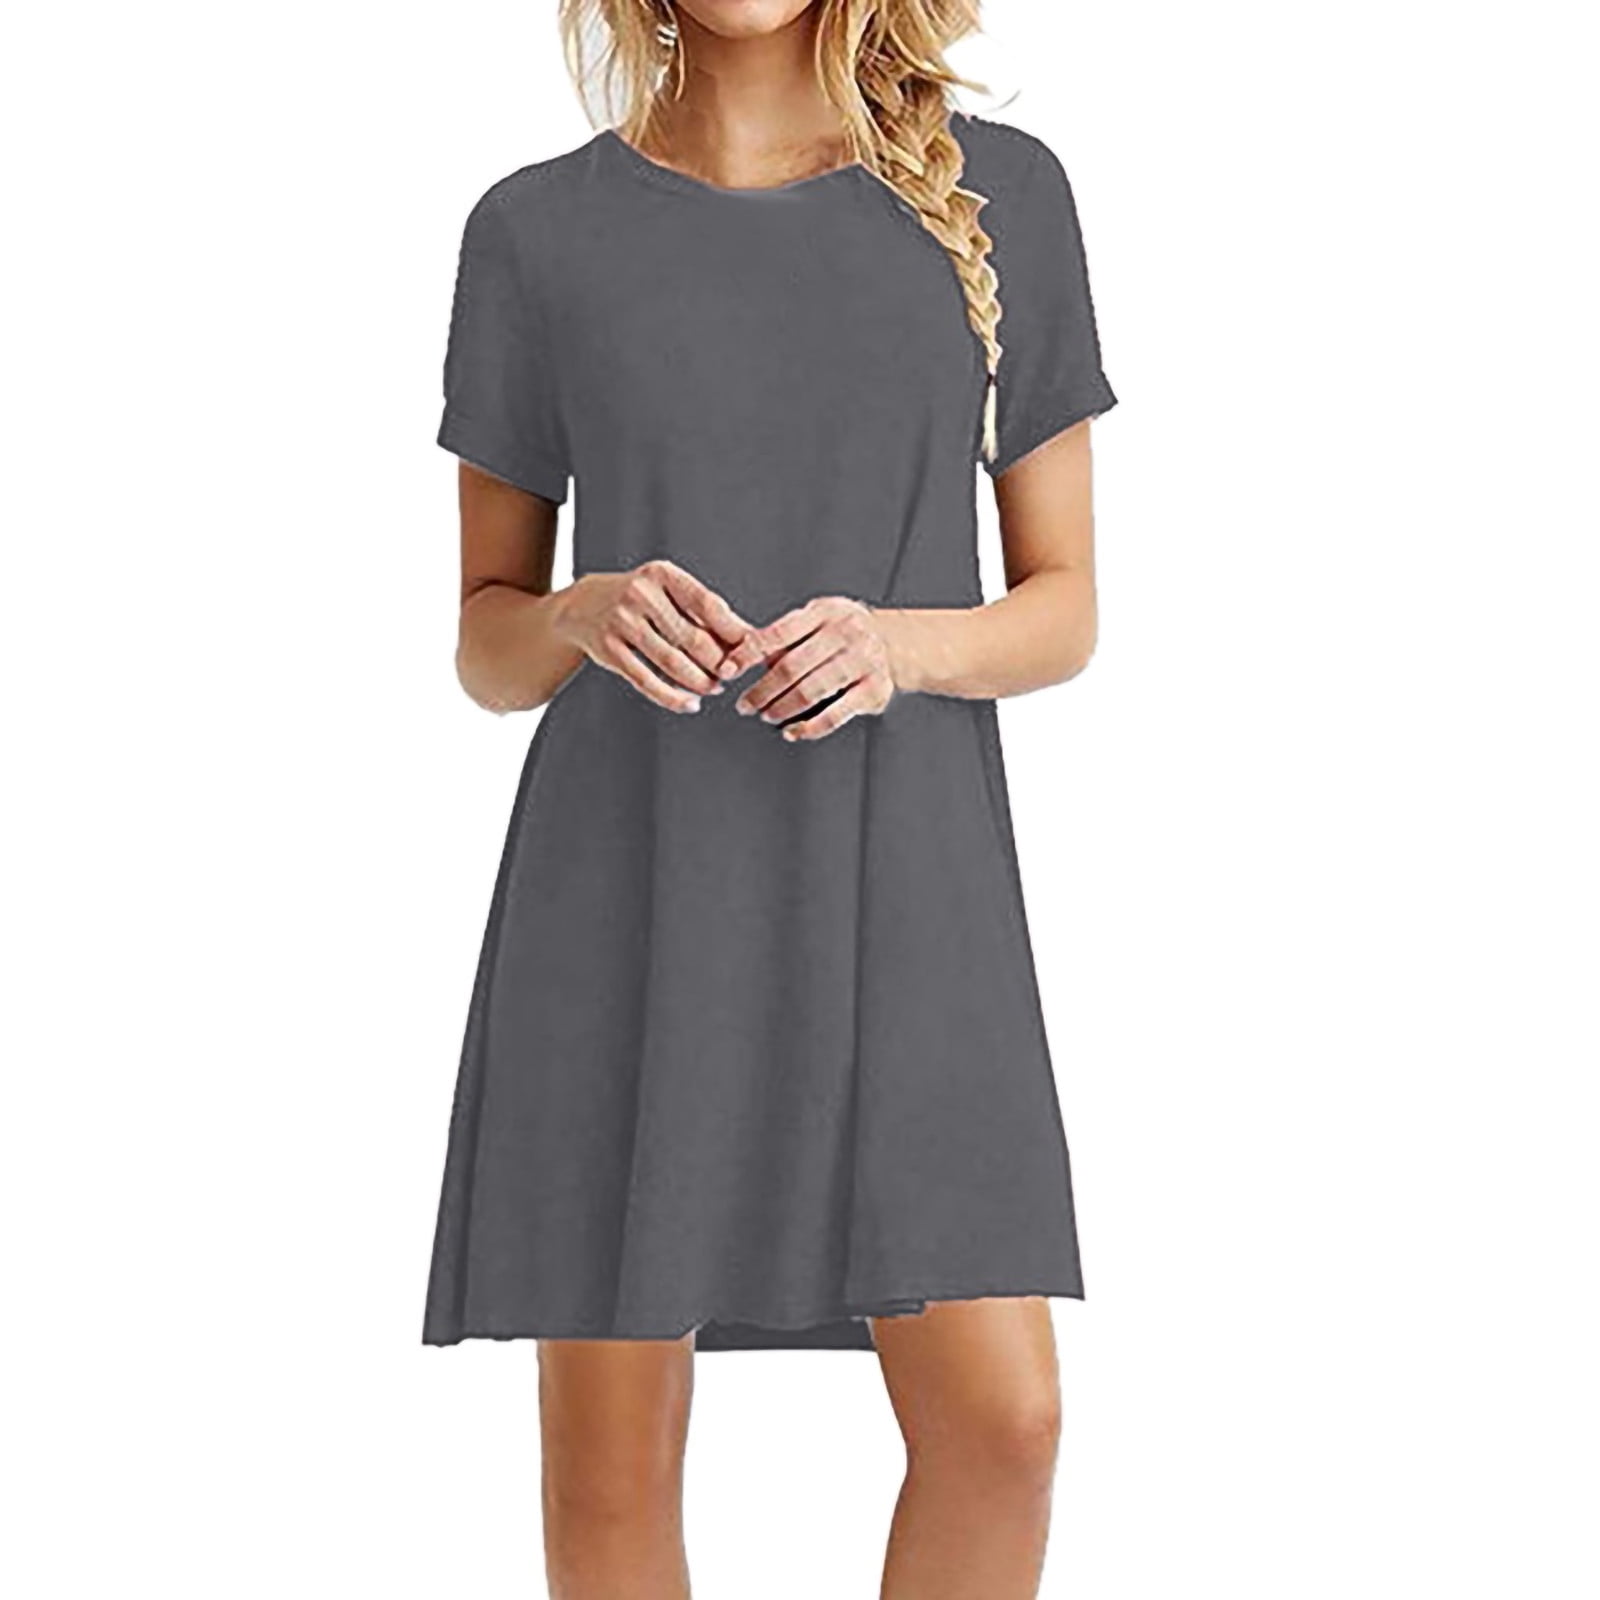 Fesfesfes Spring Dresses for Women Round Neck Short Sleeve Dress Casual ...